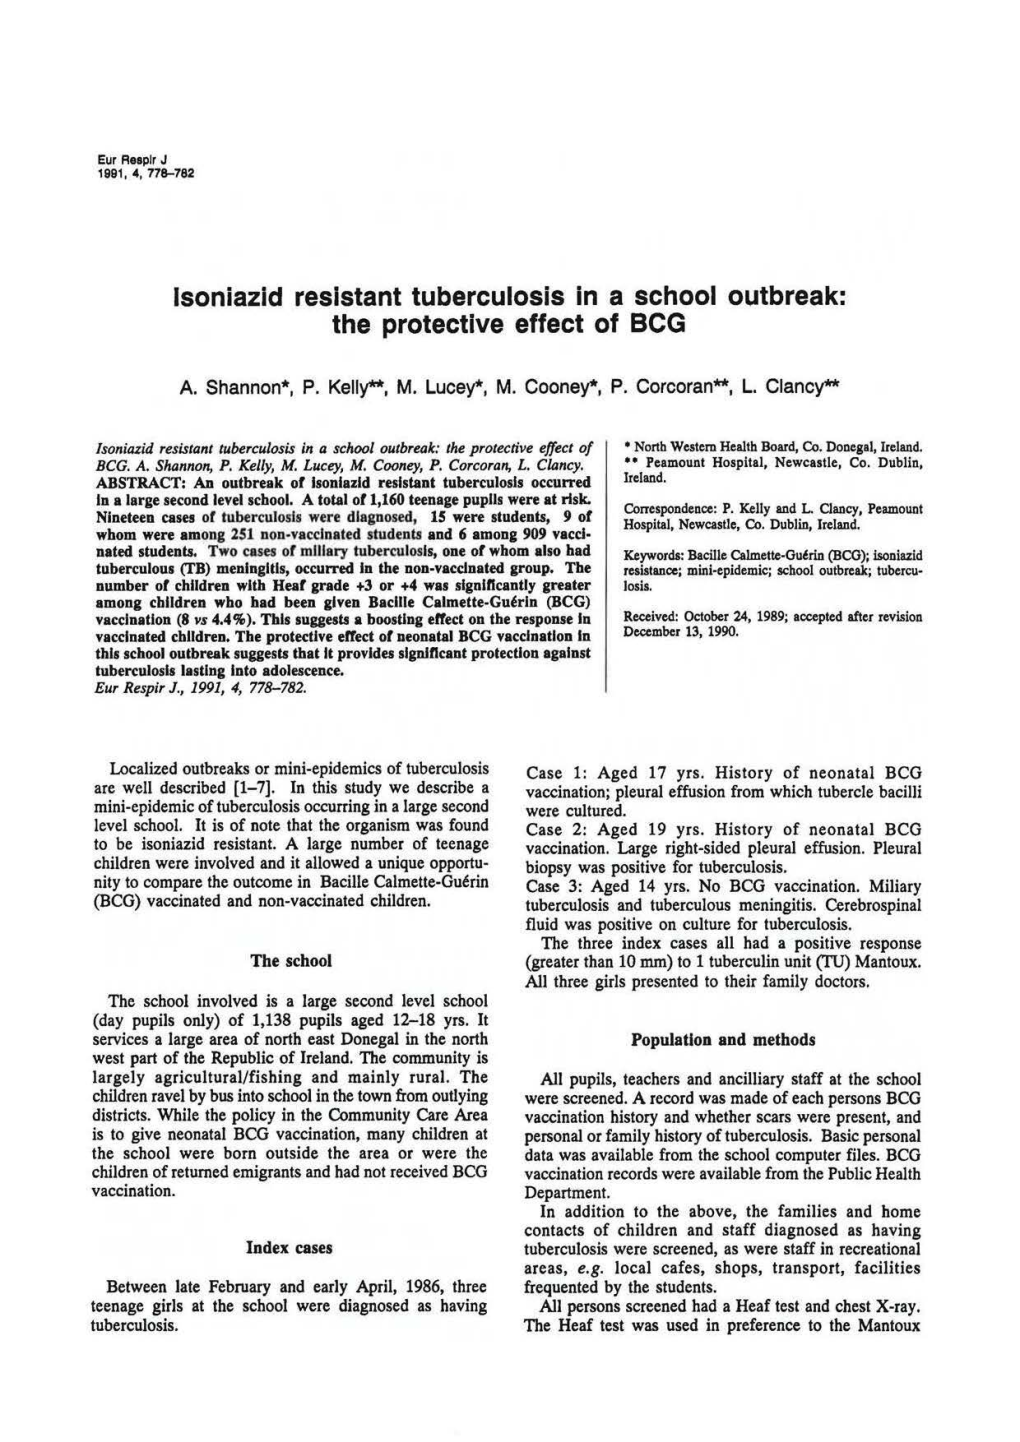 Isoniazid Resistant Tuberculosis in a School Outbreak: the Protective Effect of BCG